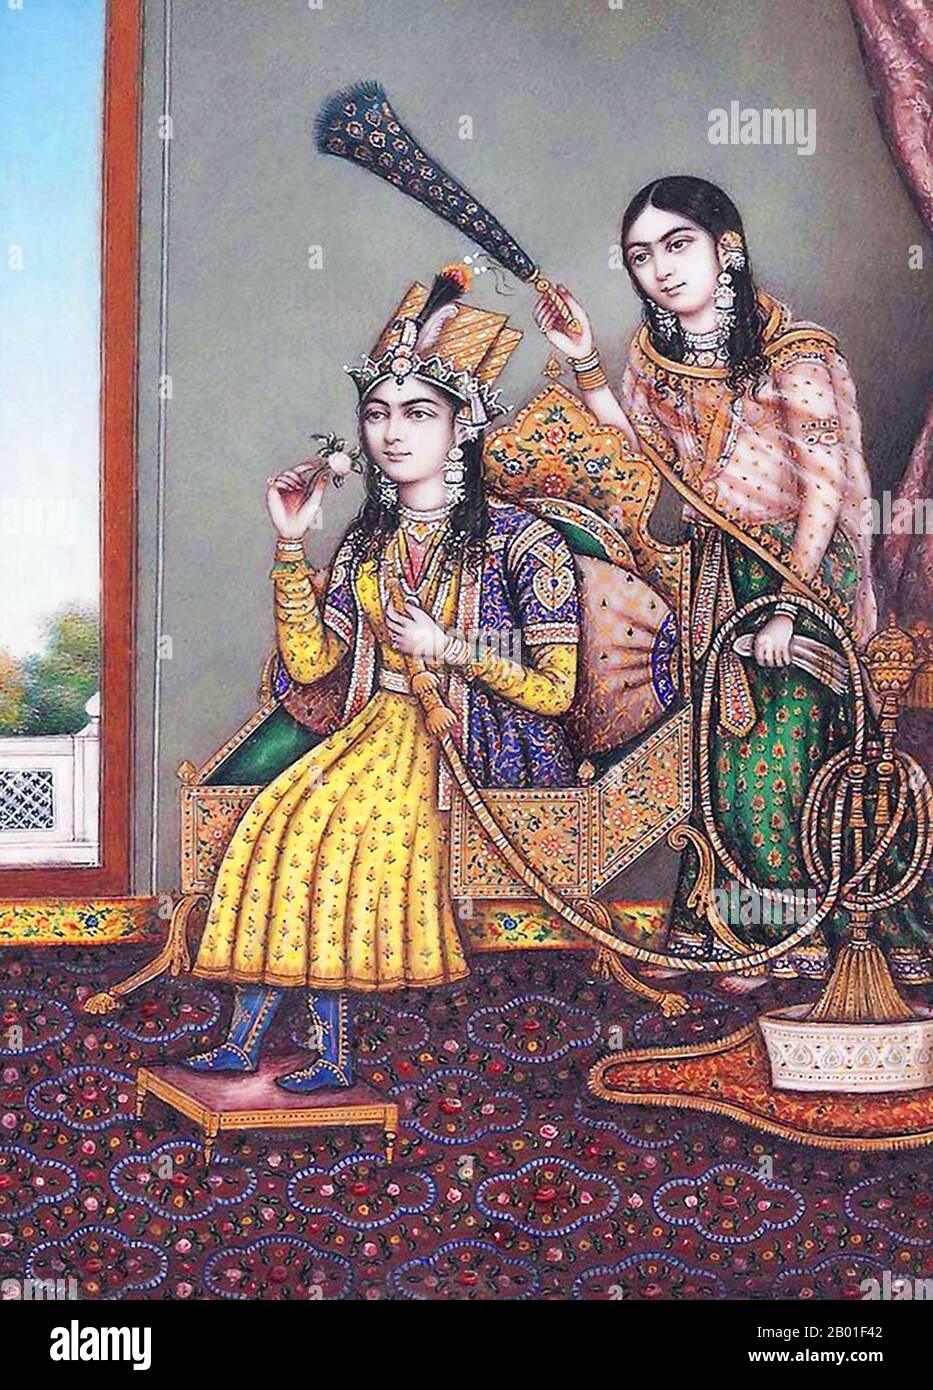 India: Mumtaz Mahal (29 October 1593 - 17 June 1631), consort of Emperor Shah Jahan (5 January 1592 - 22 January 1666), smoking a water pipe while fanned by a servant. Gouache painting, c. 1860.  Mumtaz Mahal, born Arjumand Banu Begum, was empress consort to Mughal Emperor Shah Jahan. Her family was Persian nobility from Agra, and she was the niece of empress Nur Jahan. She was Shah Jahan's second wife, but was his favourite, and together they had 14 children. She died during the birth of their 14th child, and Shah Jahan had the Taj Mahal built as a tomb for her, a monument to his undying love Stock Photo